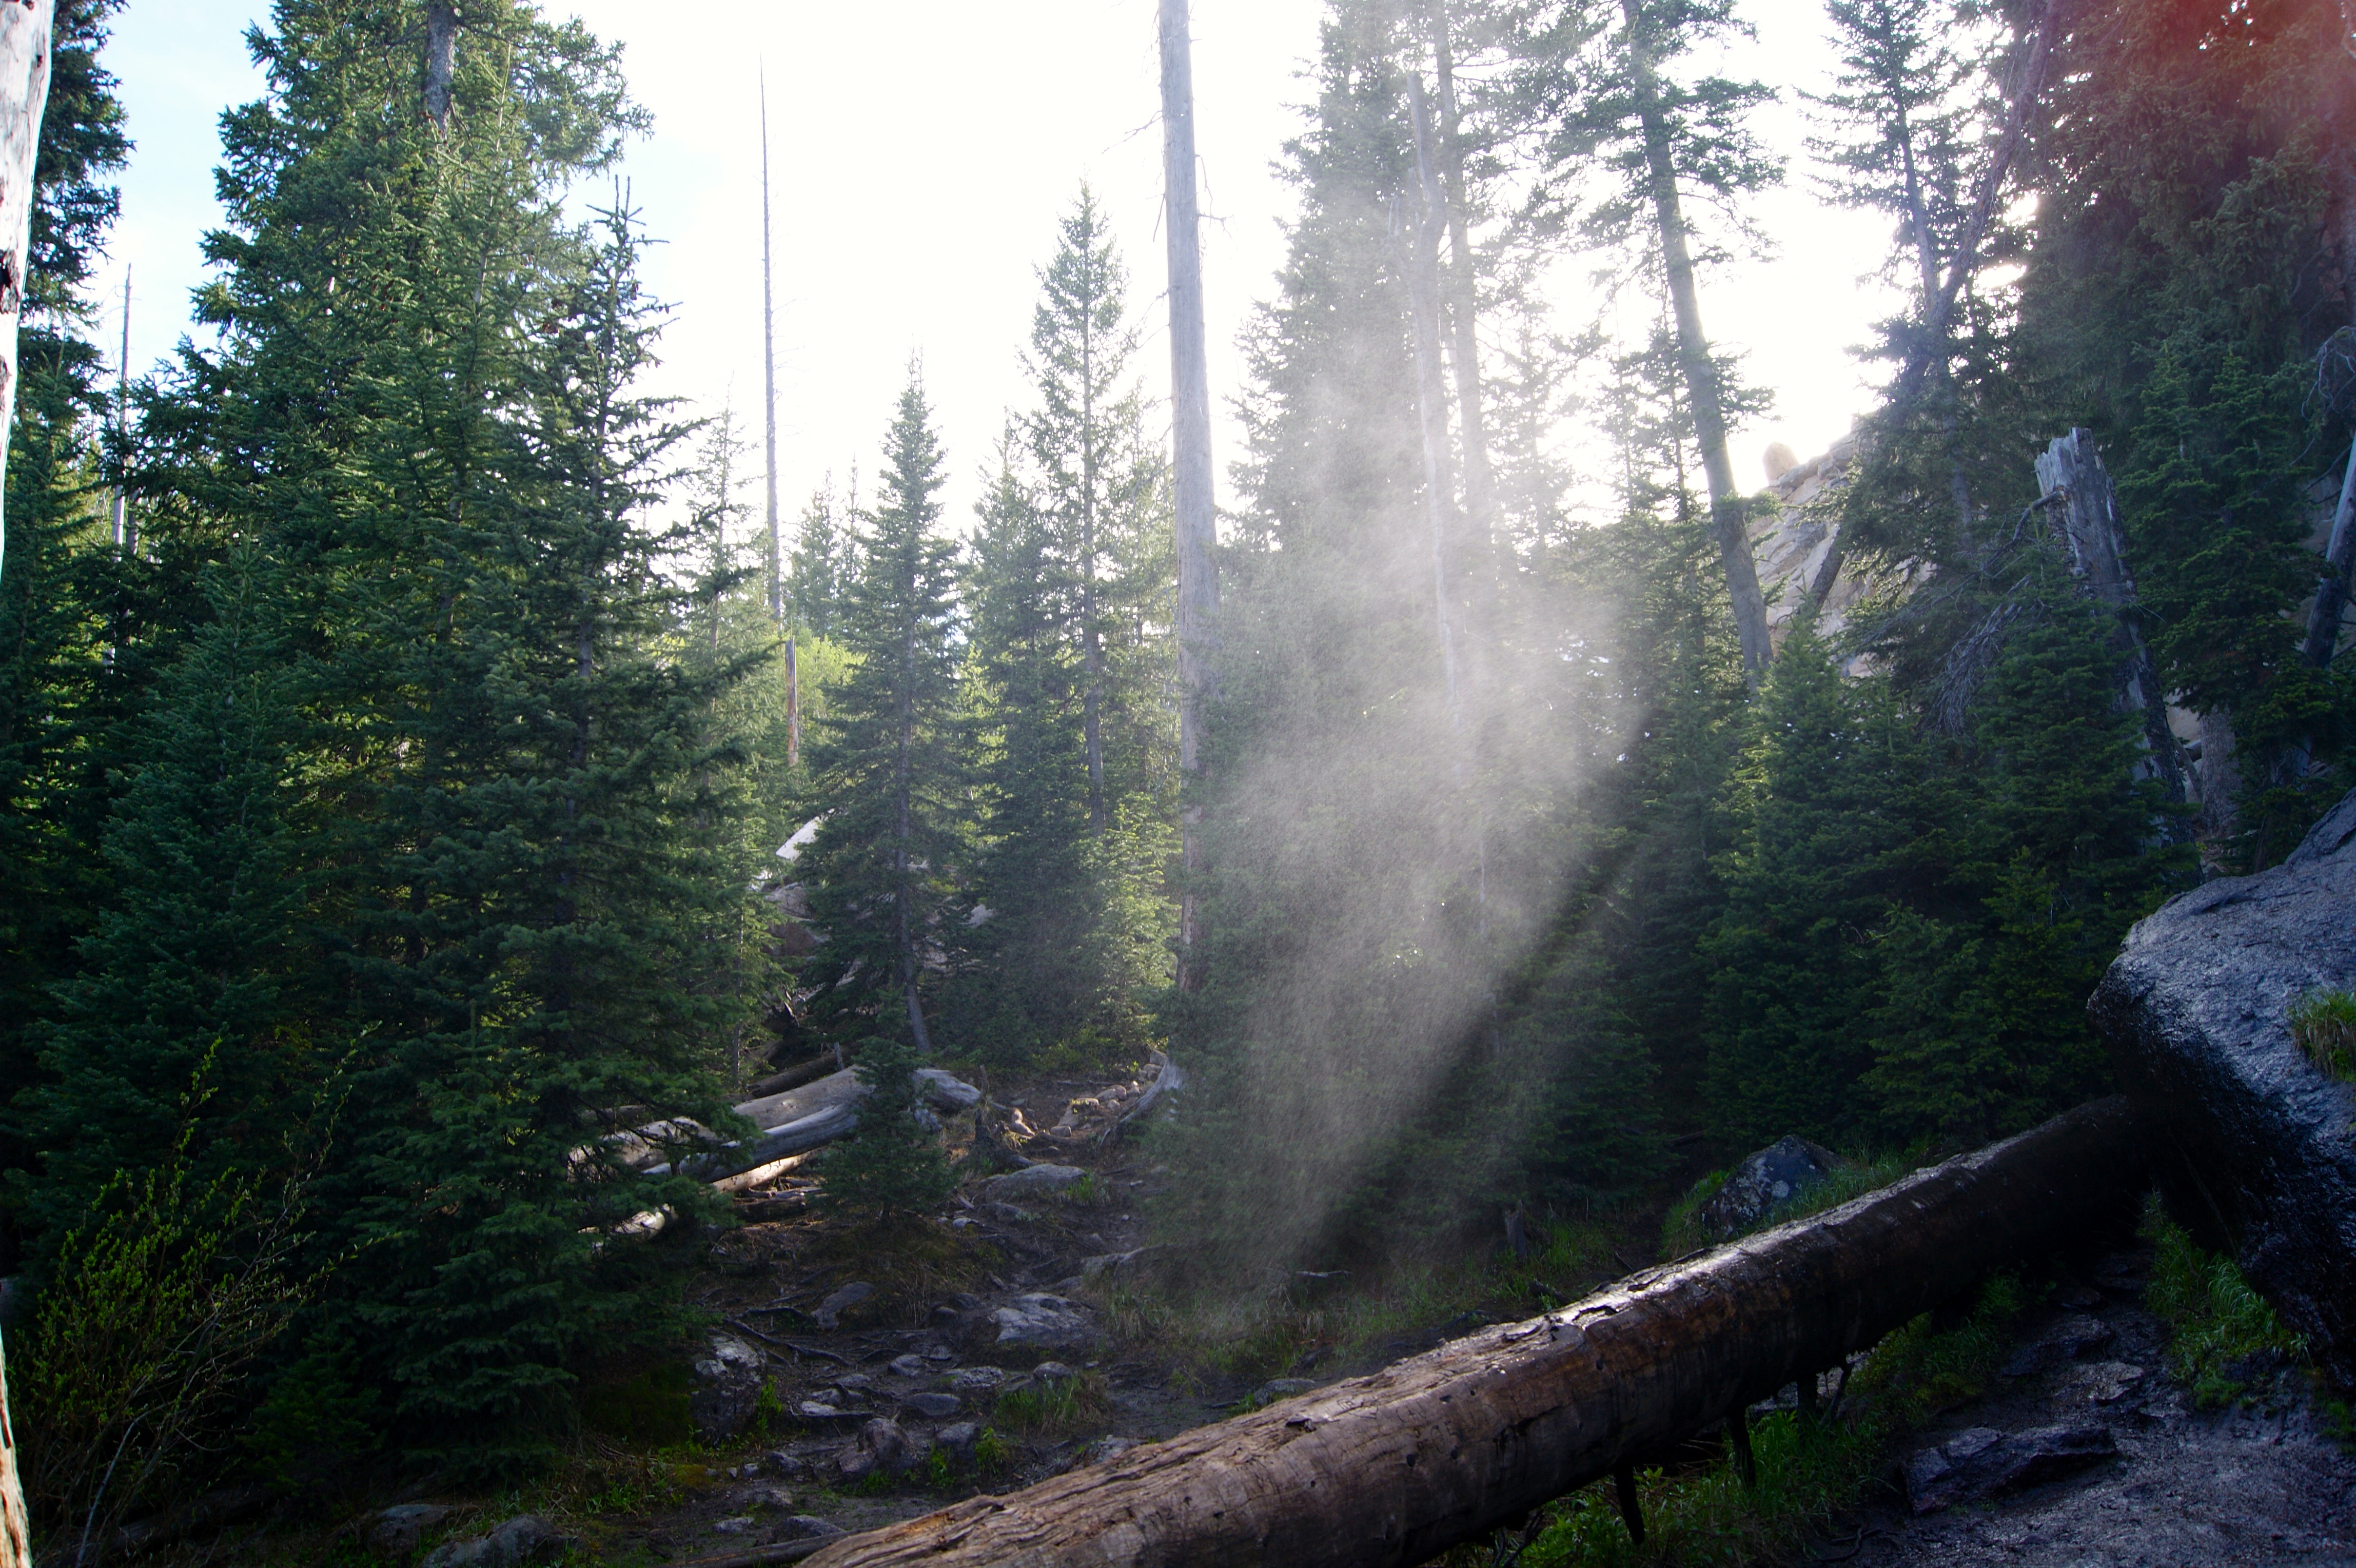 Rocky Mountains National Park - Photo in a misty forest, with light breaking through the tree lines